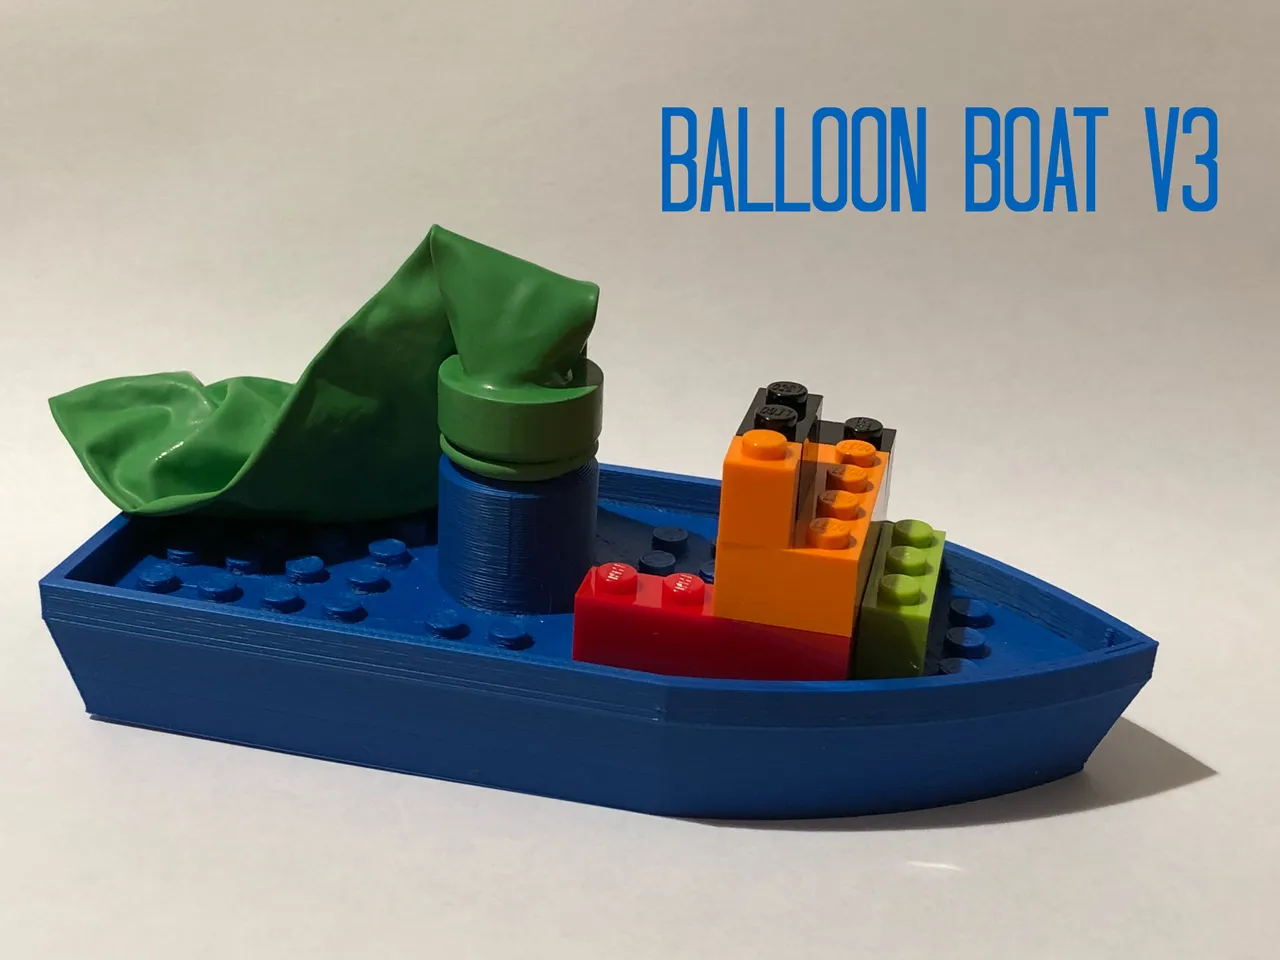 Balloon Boat V3 - Compatible with Mini Figures Lego by k-eye